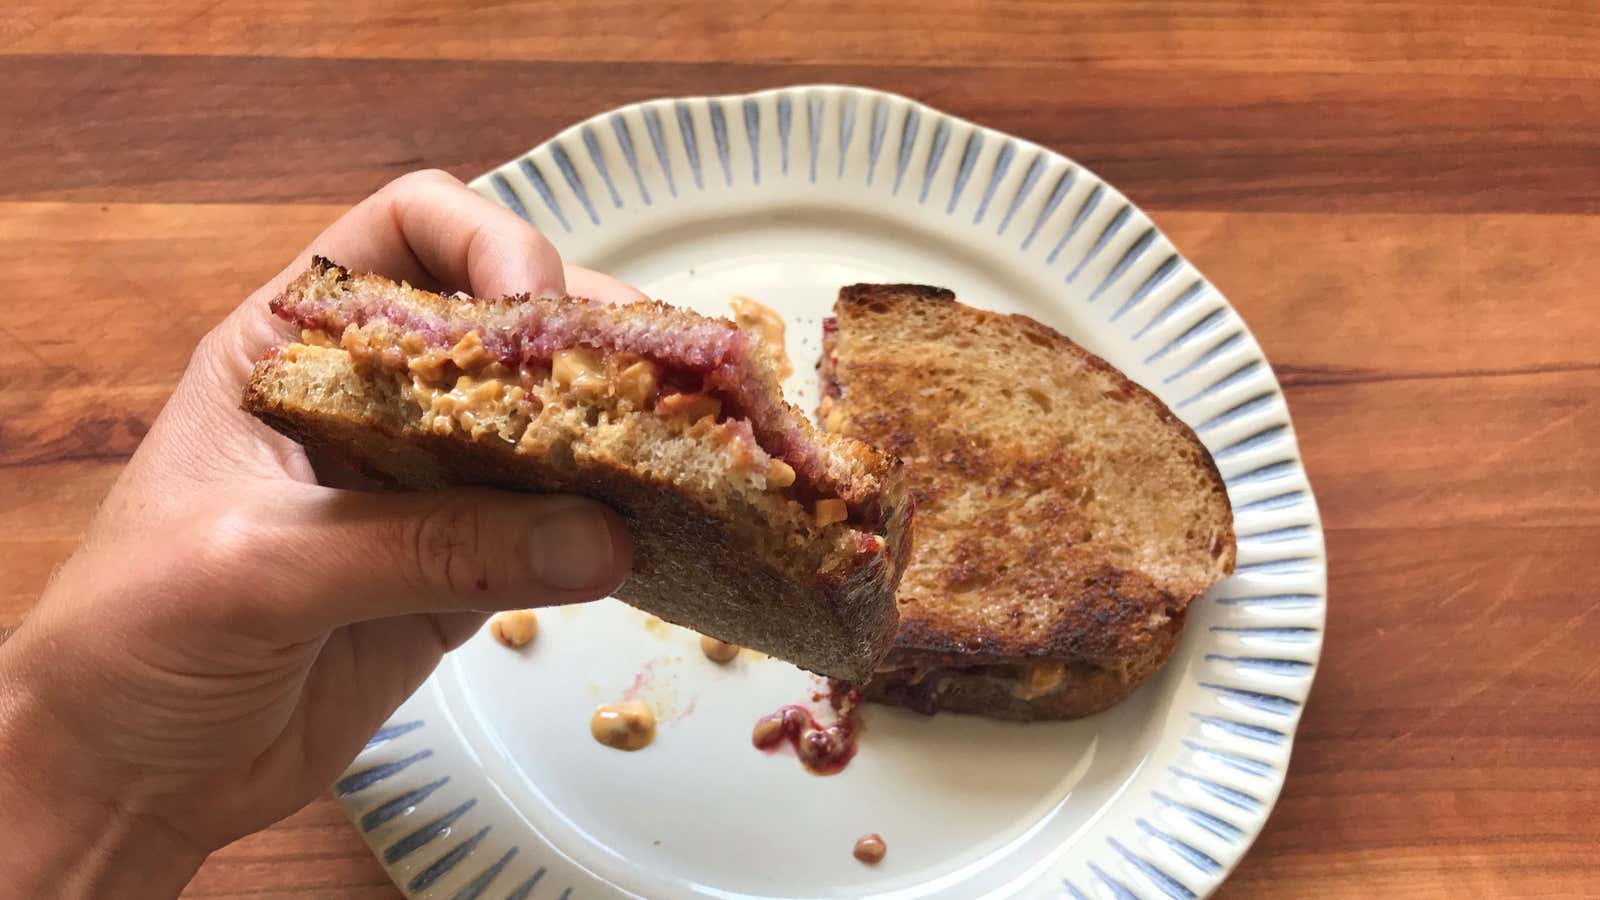 The most sublime way to make a peanut butter and jelly sandwich: Grill it